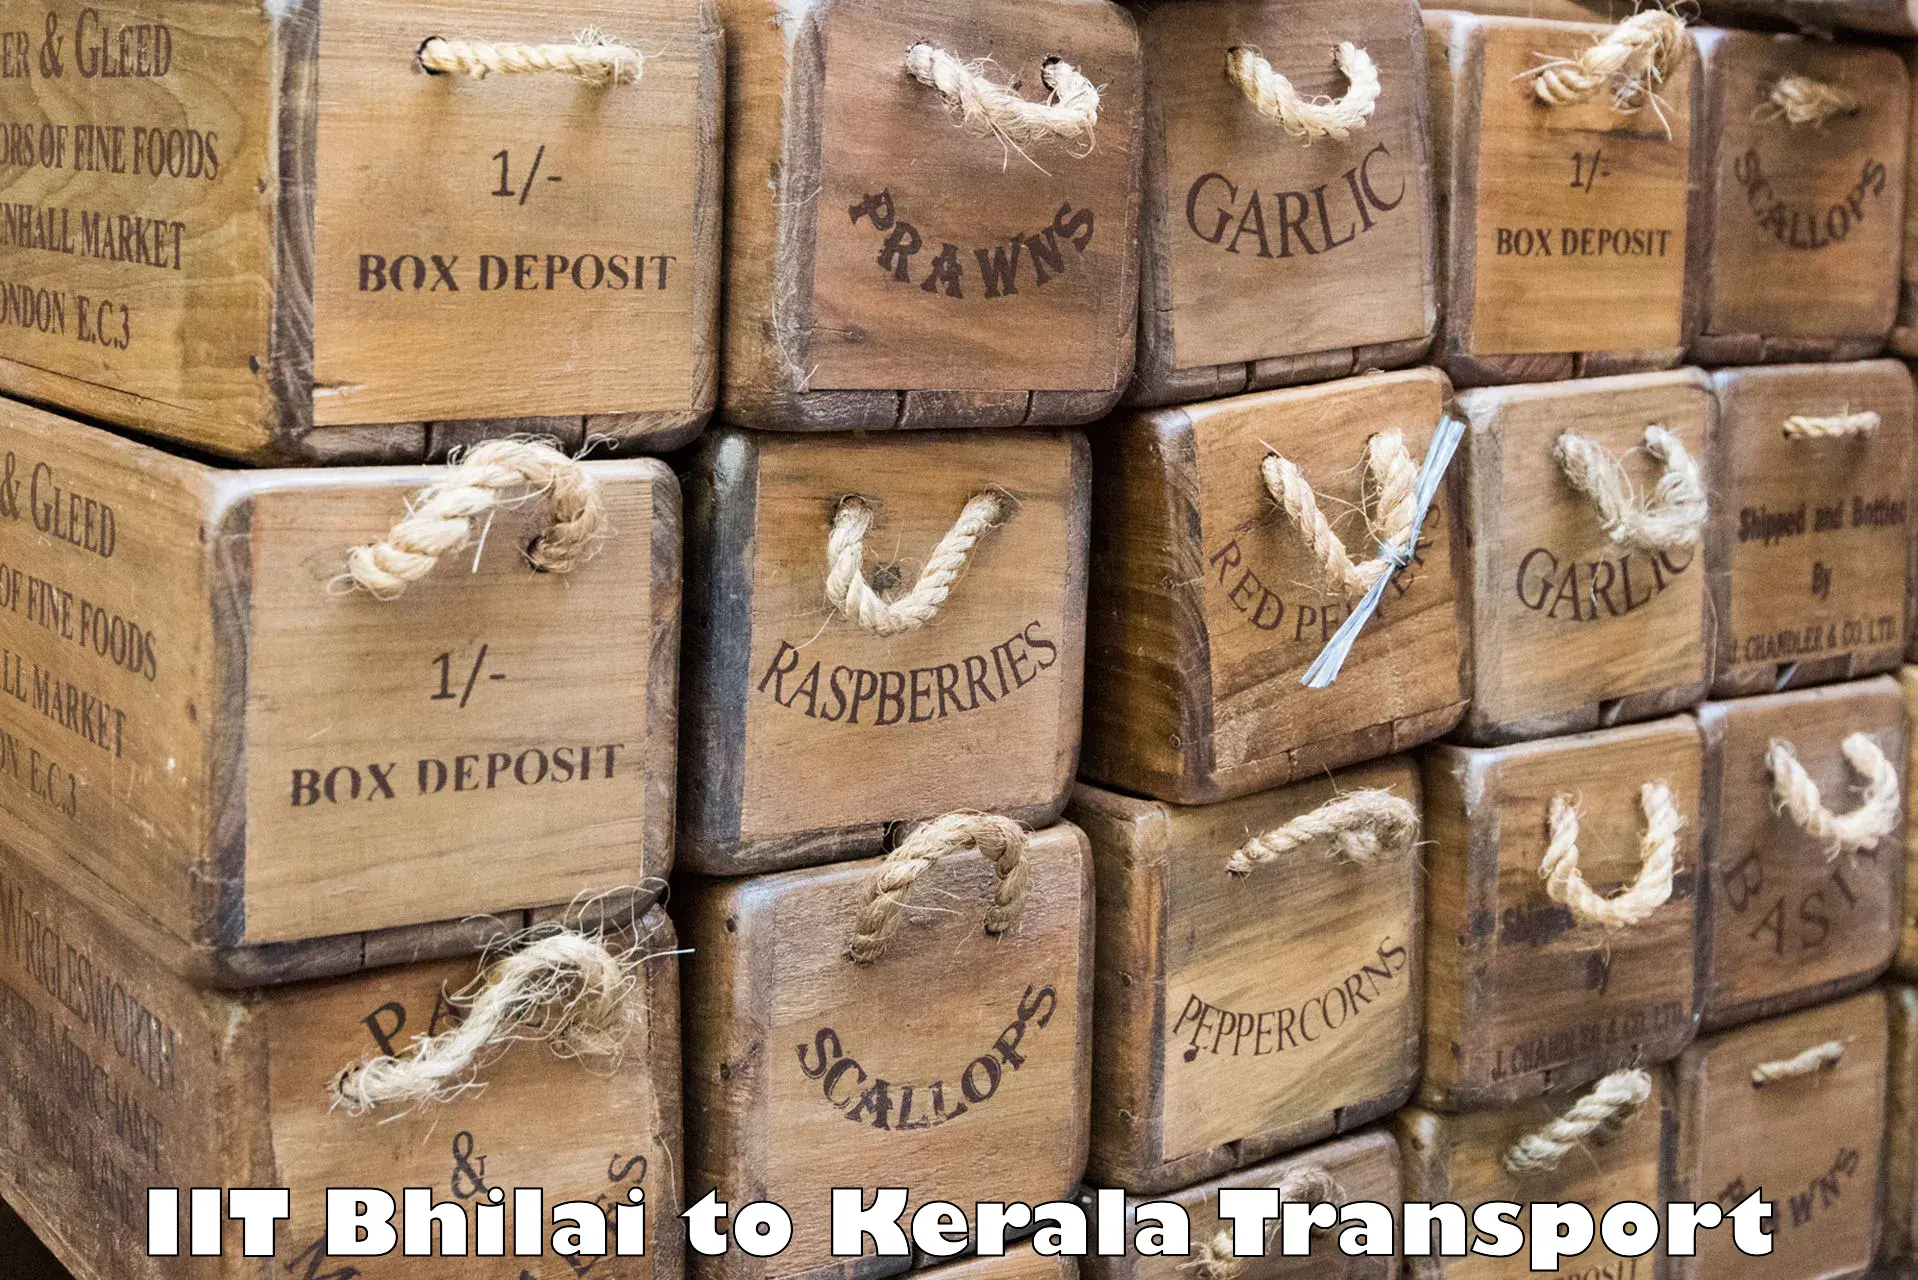 Interstate transport services IIT Bhilai to Cochin University of Science and Technology